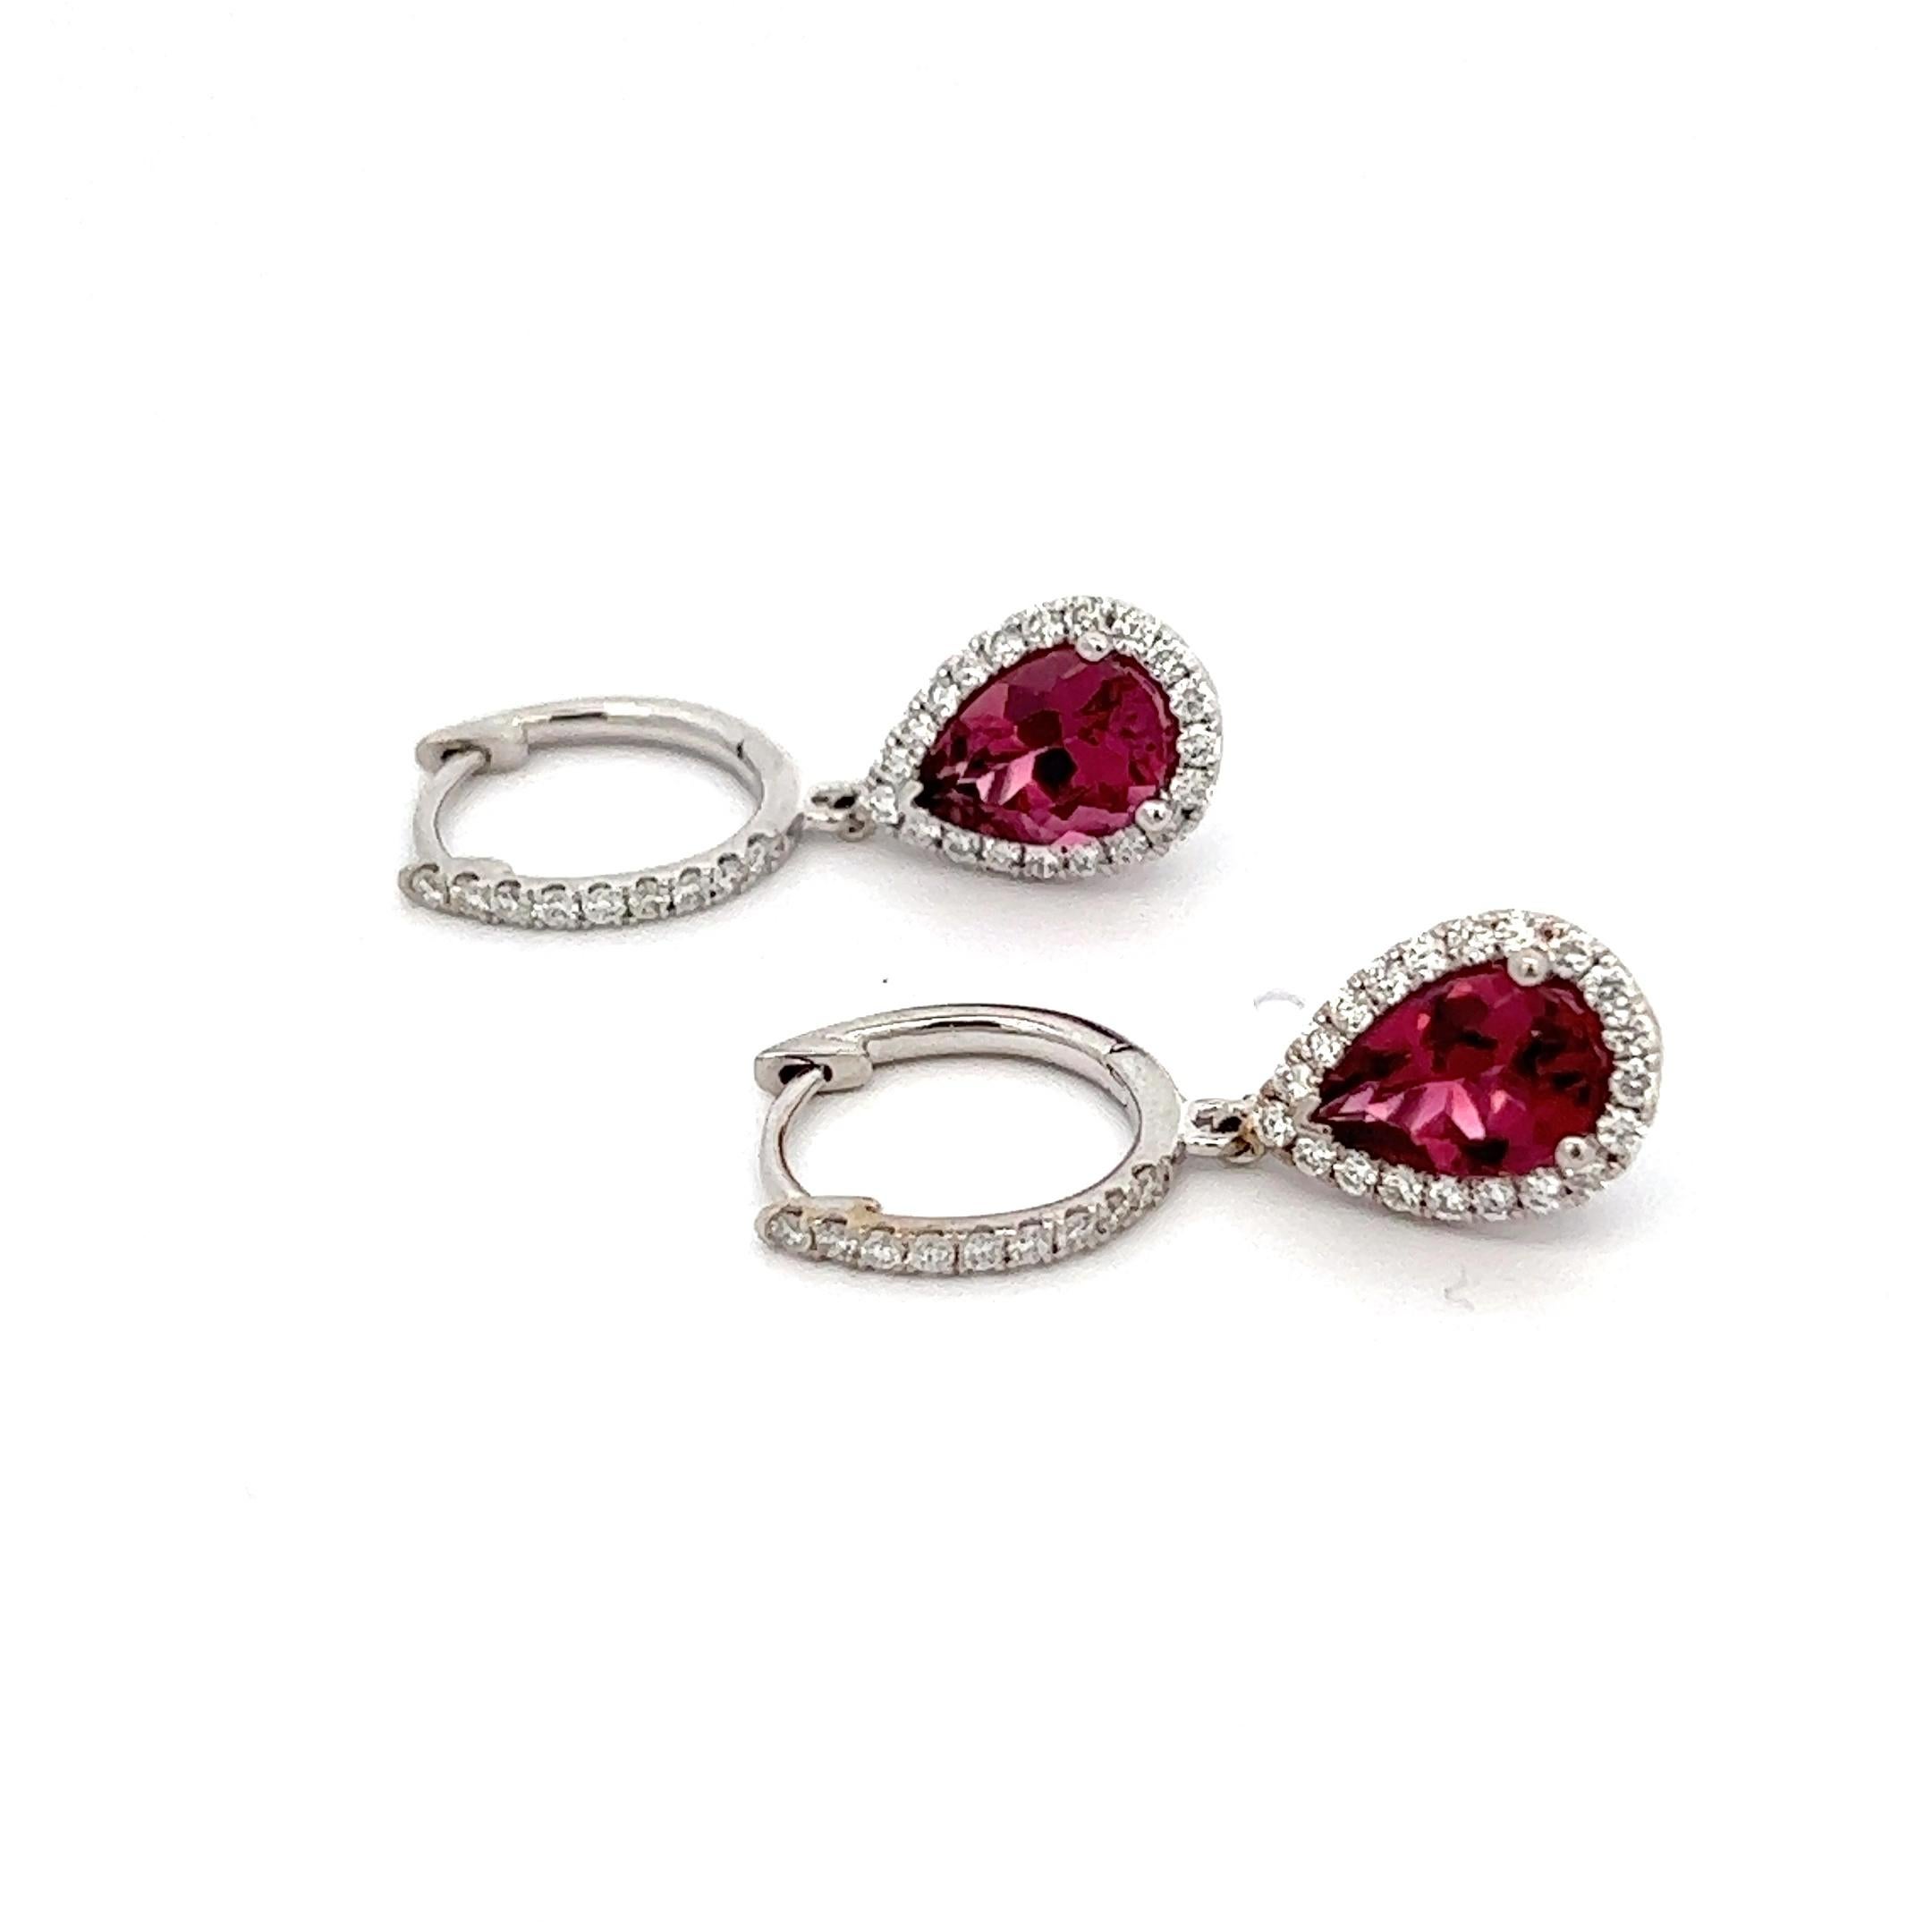 Diamond Rubellite Tourmaline Drop Earrings 18k W Gold 2.93 TCW Certified In New Condition For Sale In Brooklyn, NY